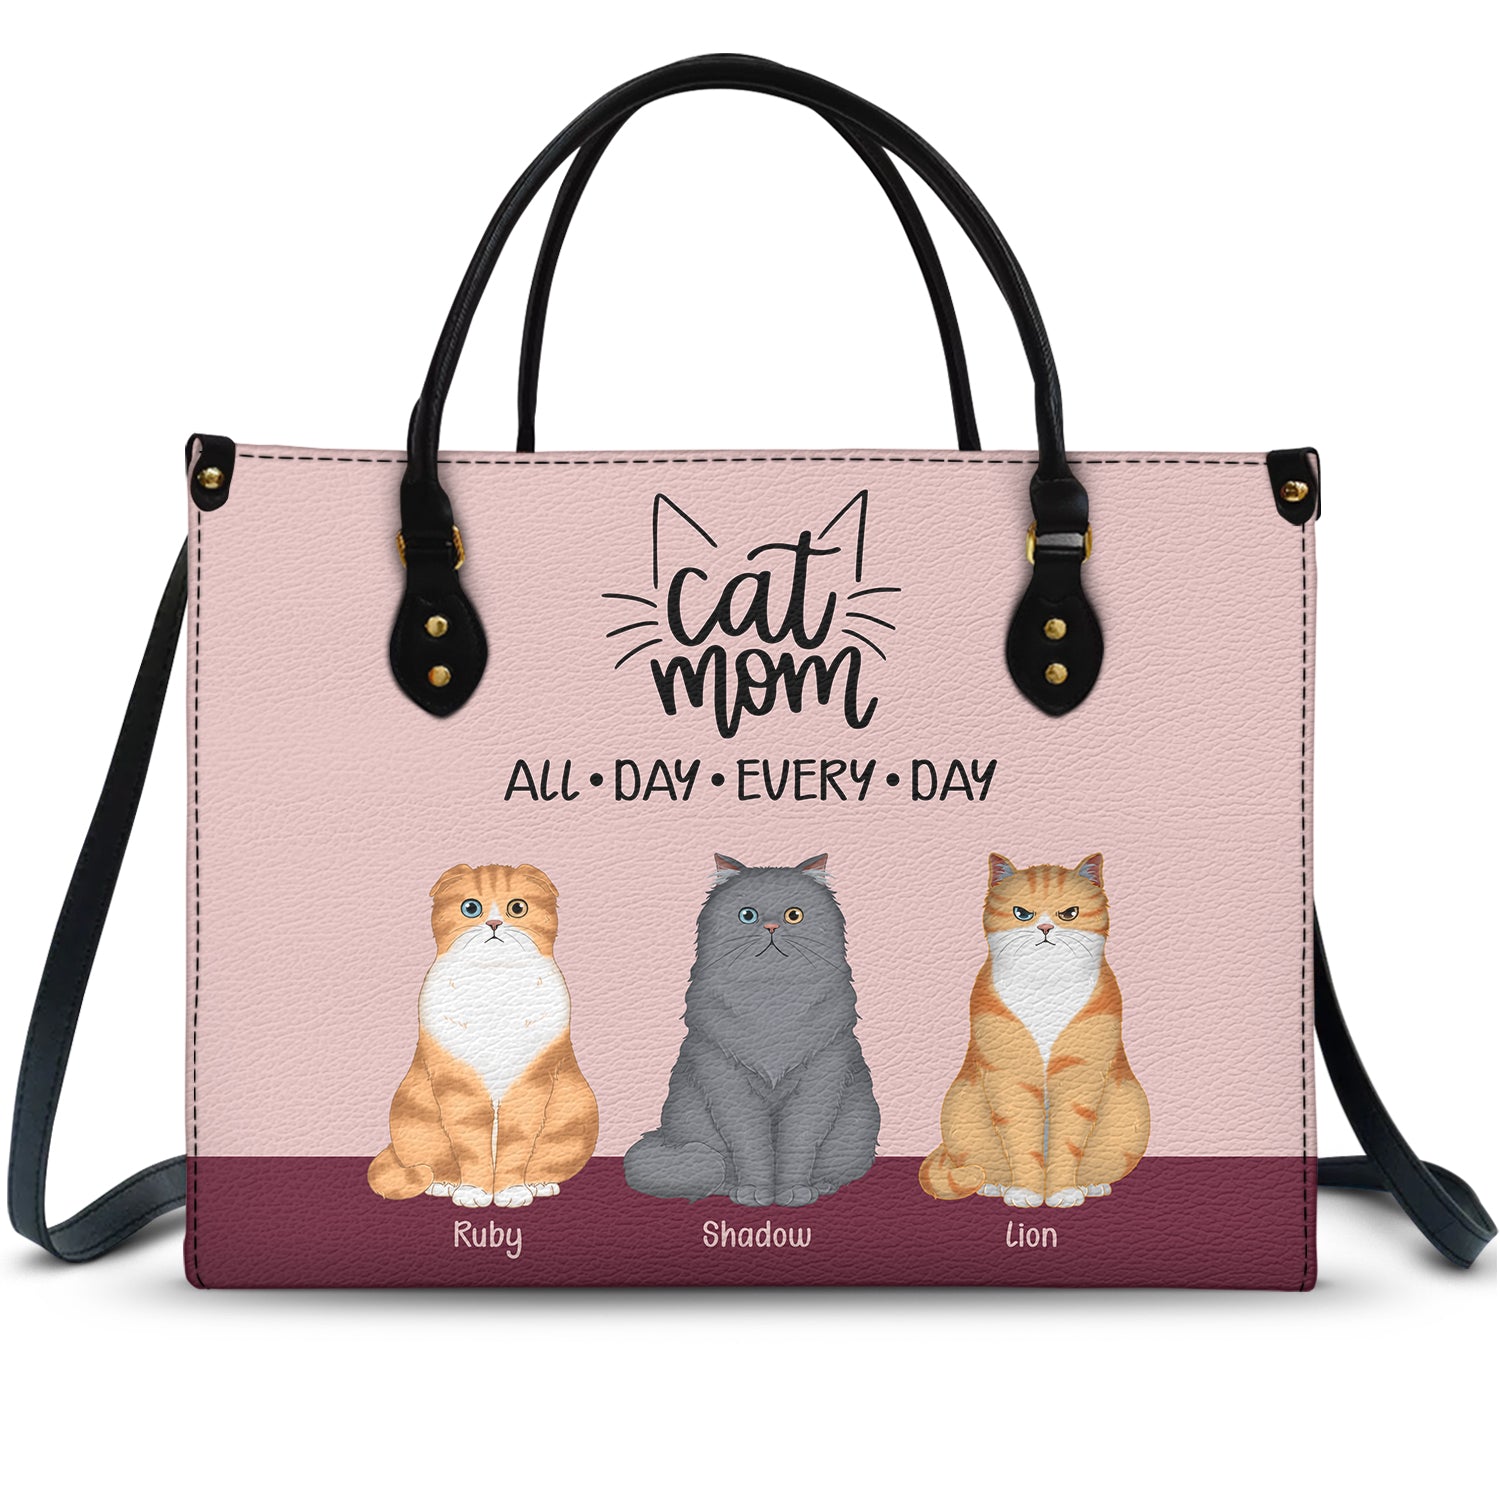 All Day Every Day - Gift For Cat Mom - Personalized Leather Bag